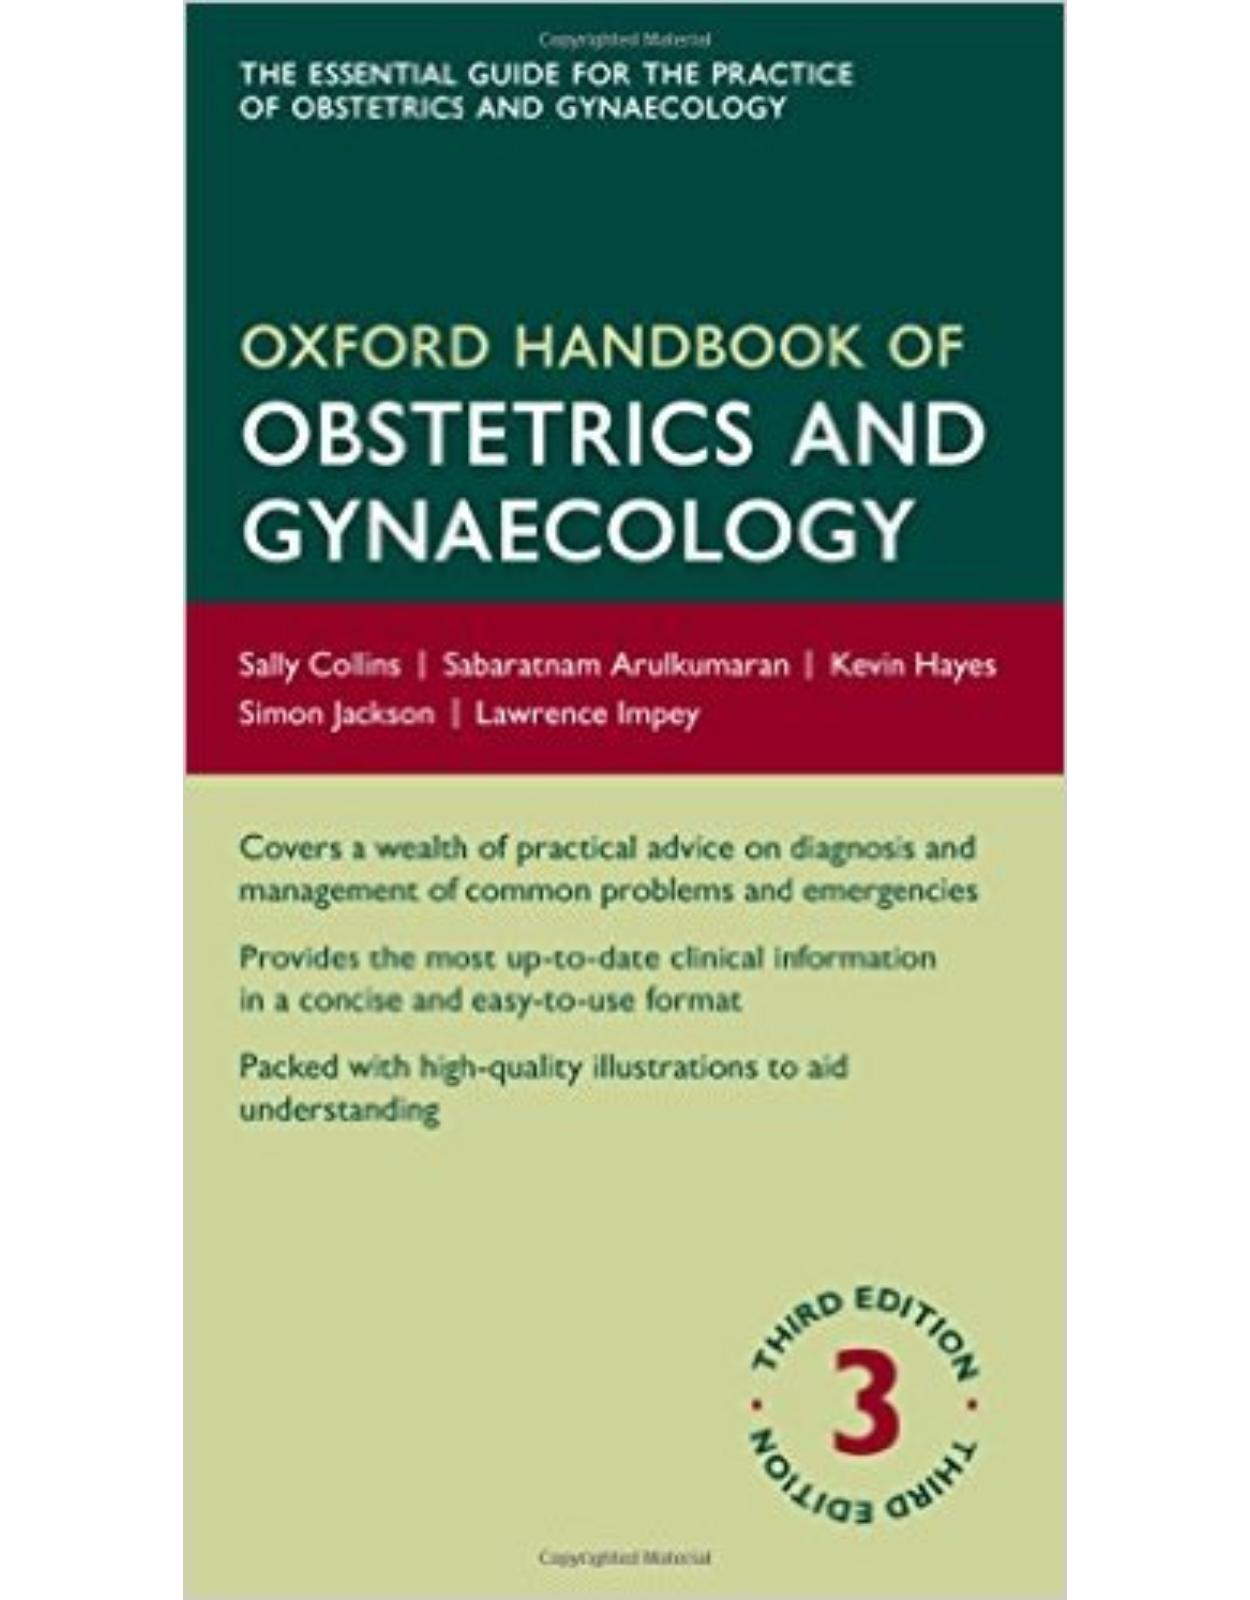 Oxford Handbook of Obstetrics and Gynaecology 